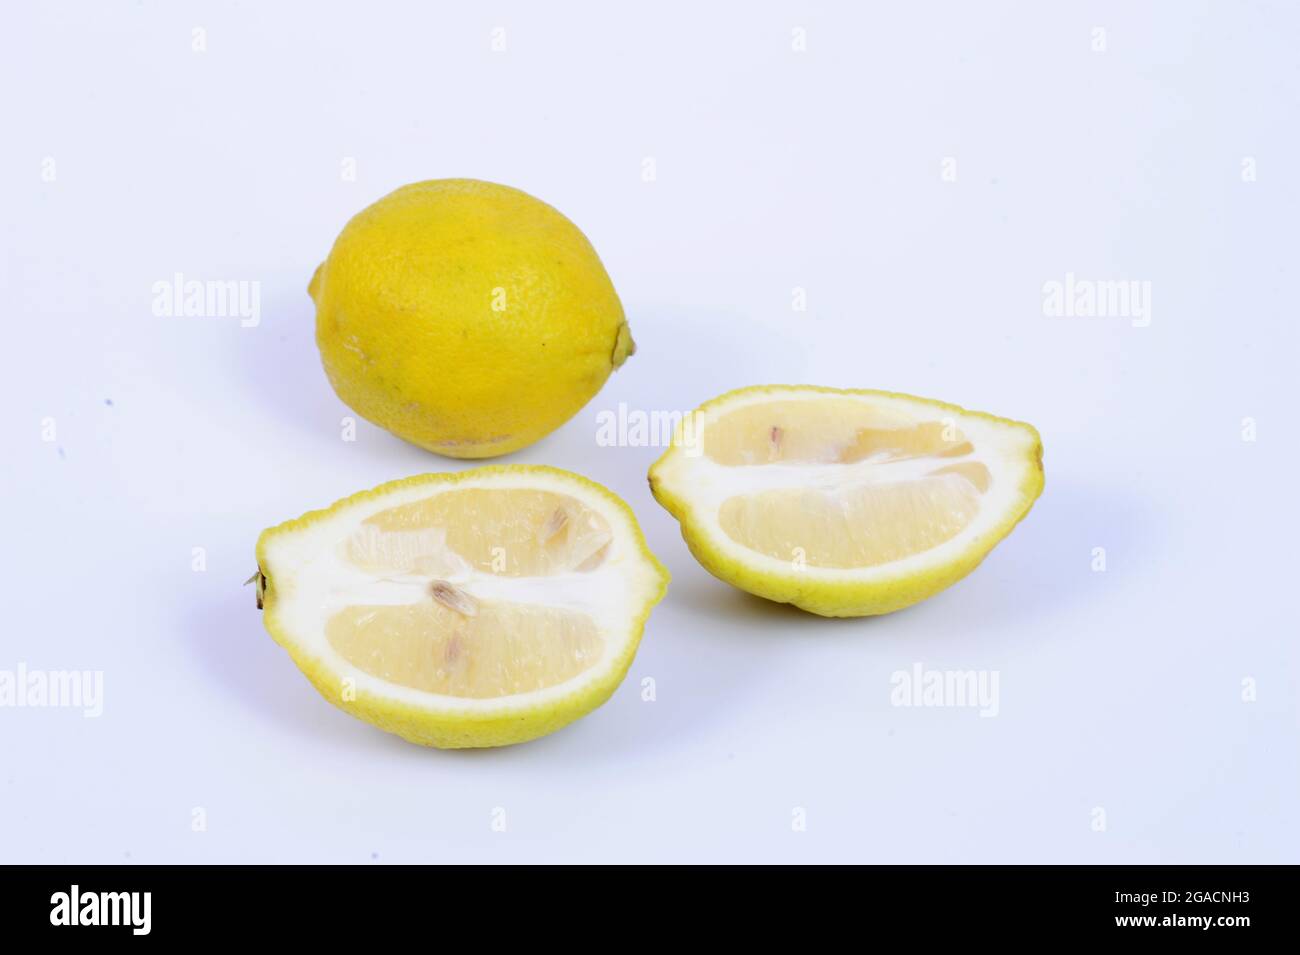 The lemon, Citrus limon, is a species of small evergreen tree in the flowering plant family Rutaceae, native to South Asia, primarily Northeast India. Stock Photo